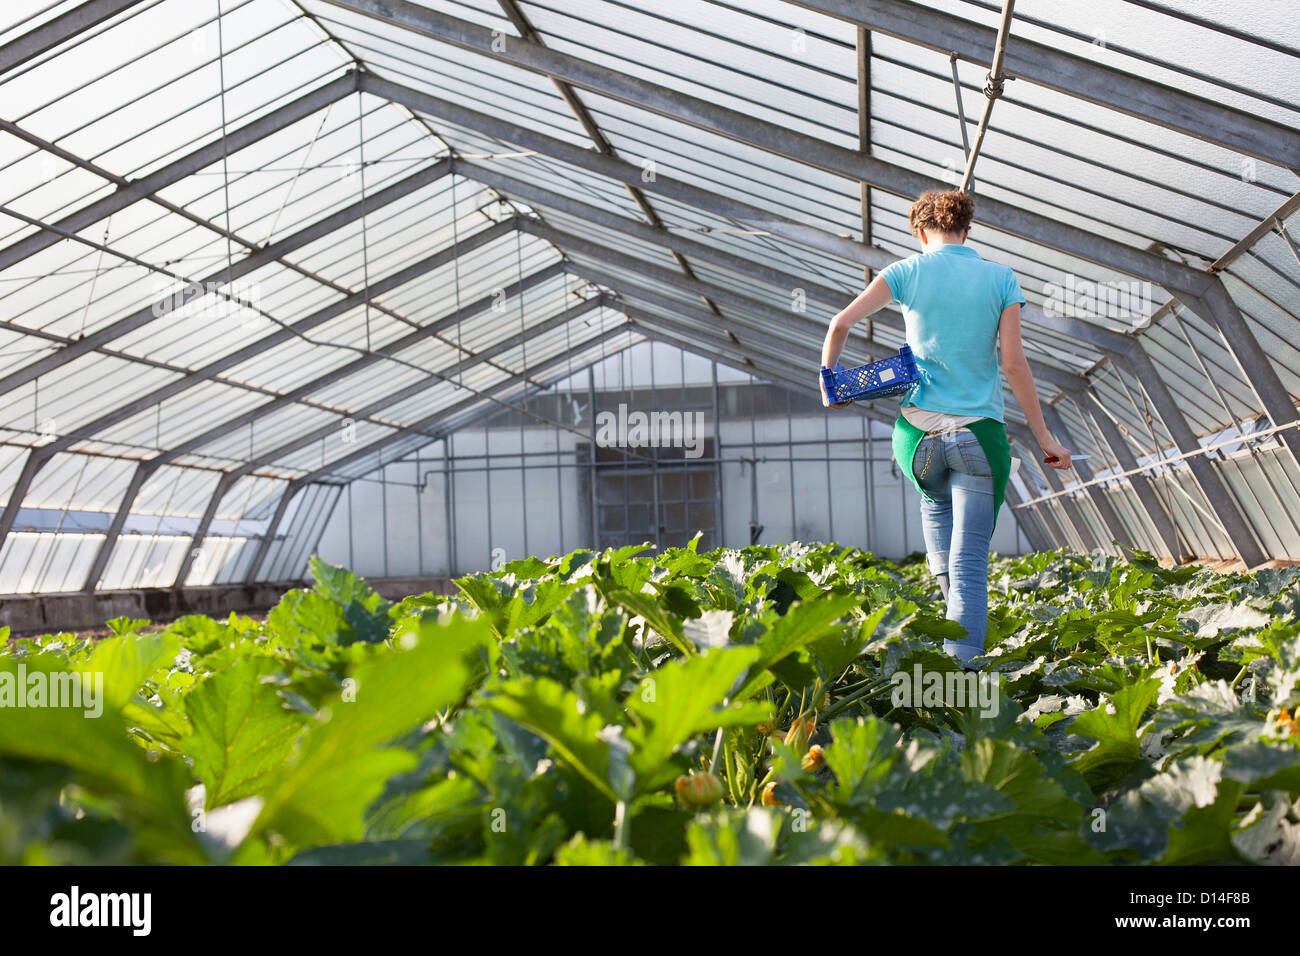 young woman working in greenhouse collecting courgettes Stock Photo